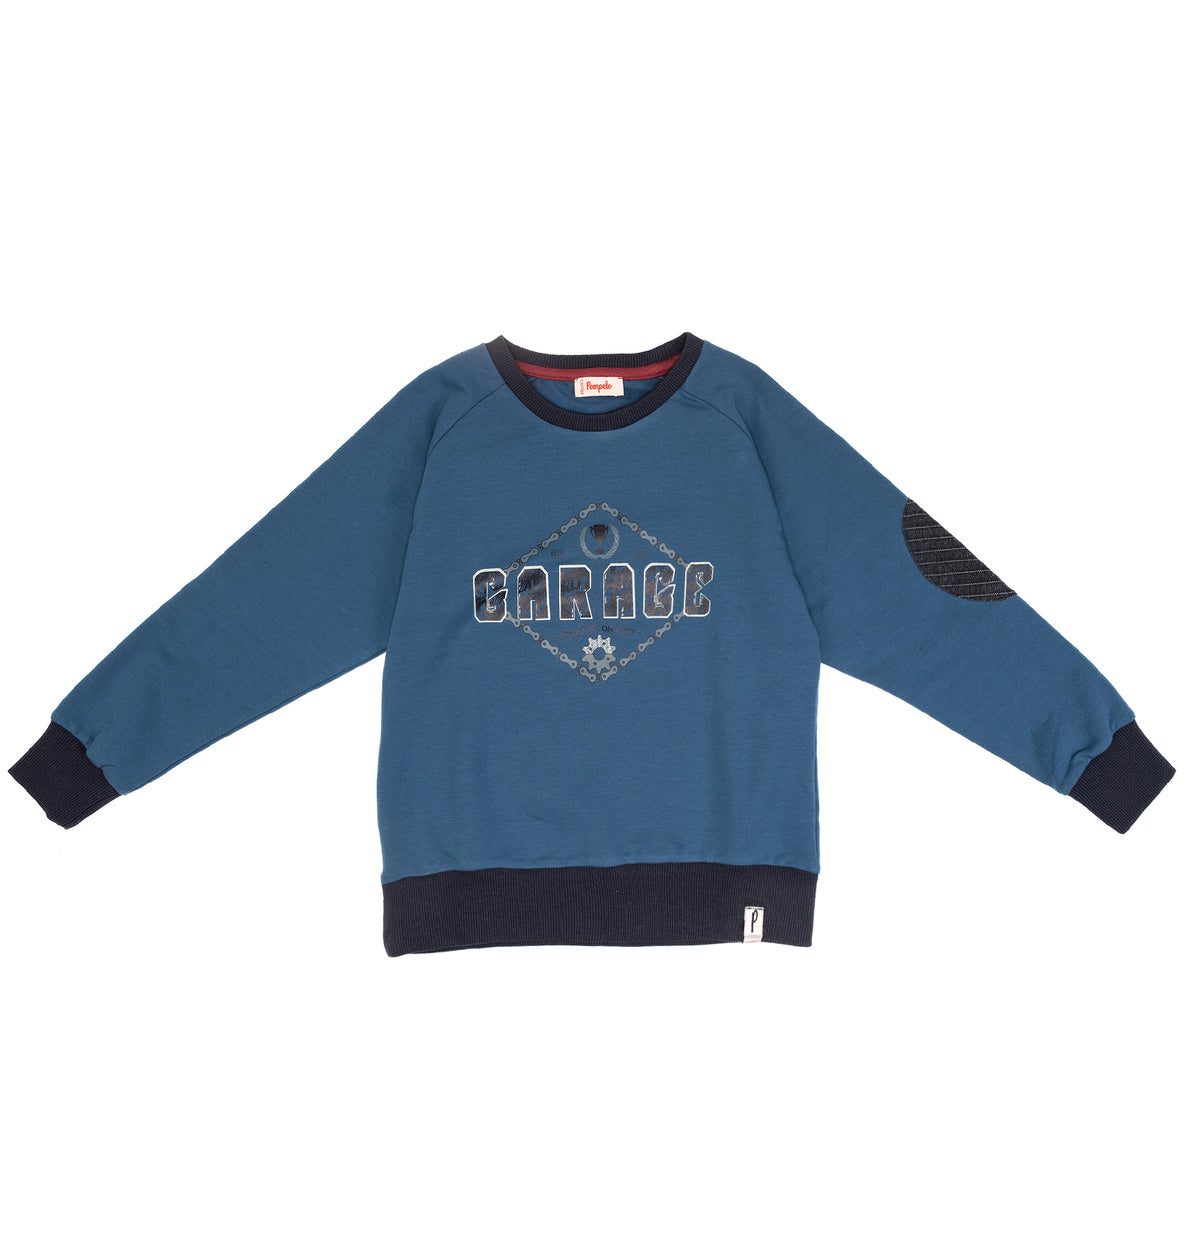 Cool printed long sleeve sweat shirt for boys by Pompelo